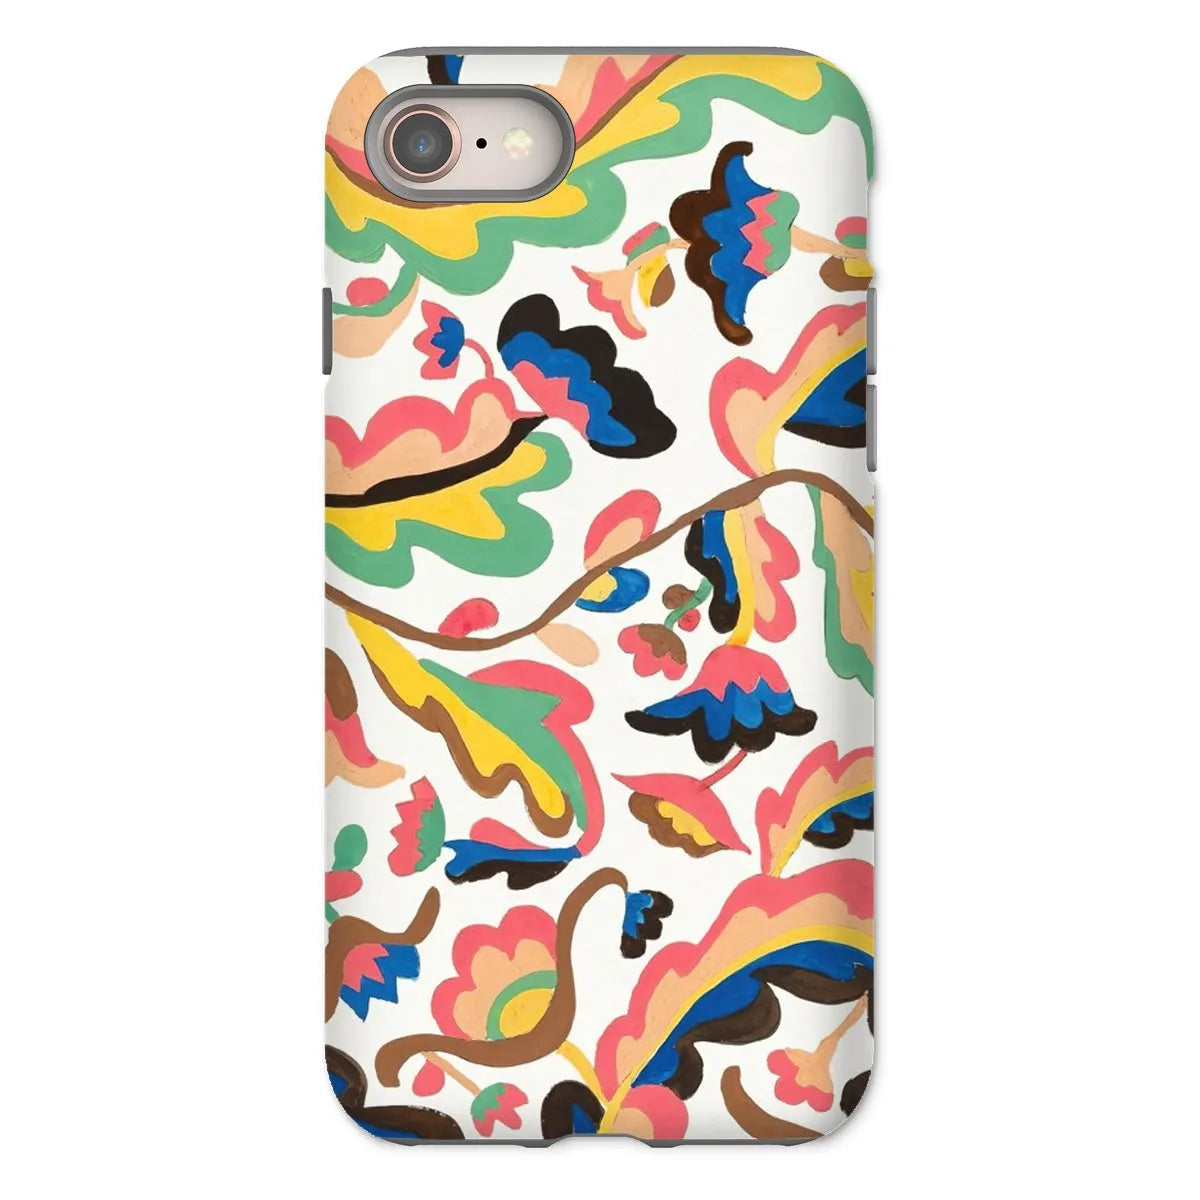 Colcha Floral Aesthetic Pattern Phone Case - Etna Wiswall - Iphone 8 / Matte - Mobile Phone Cases - Aesthetic Art